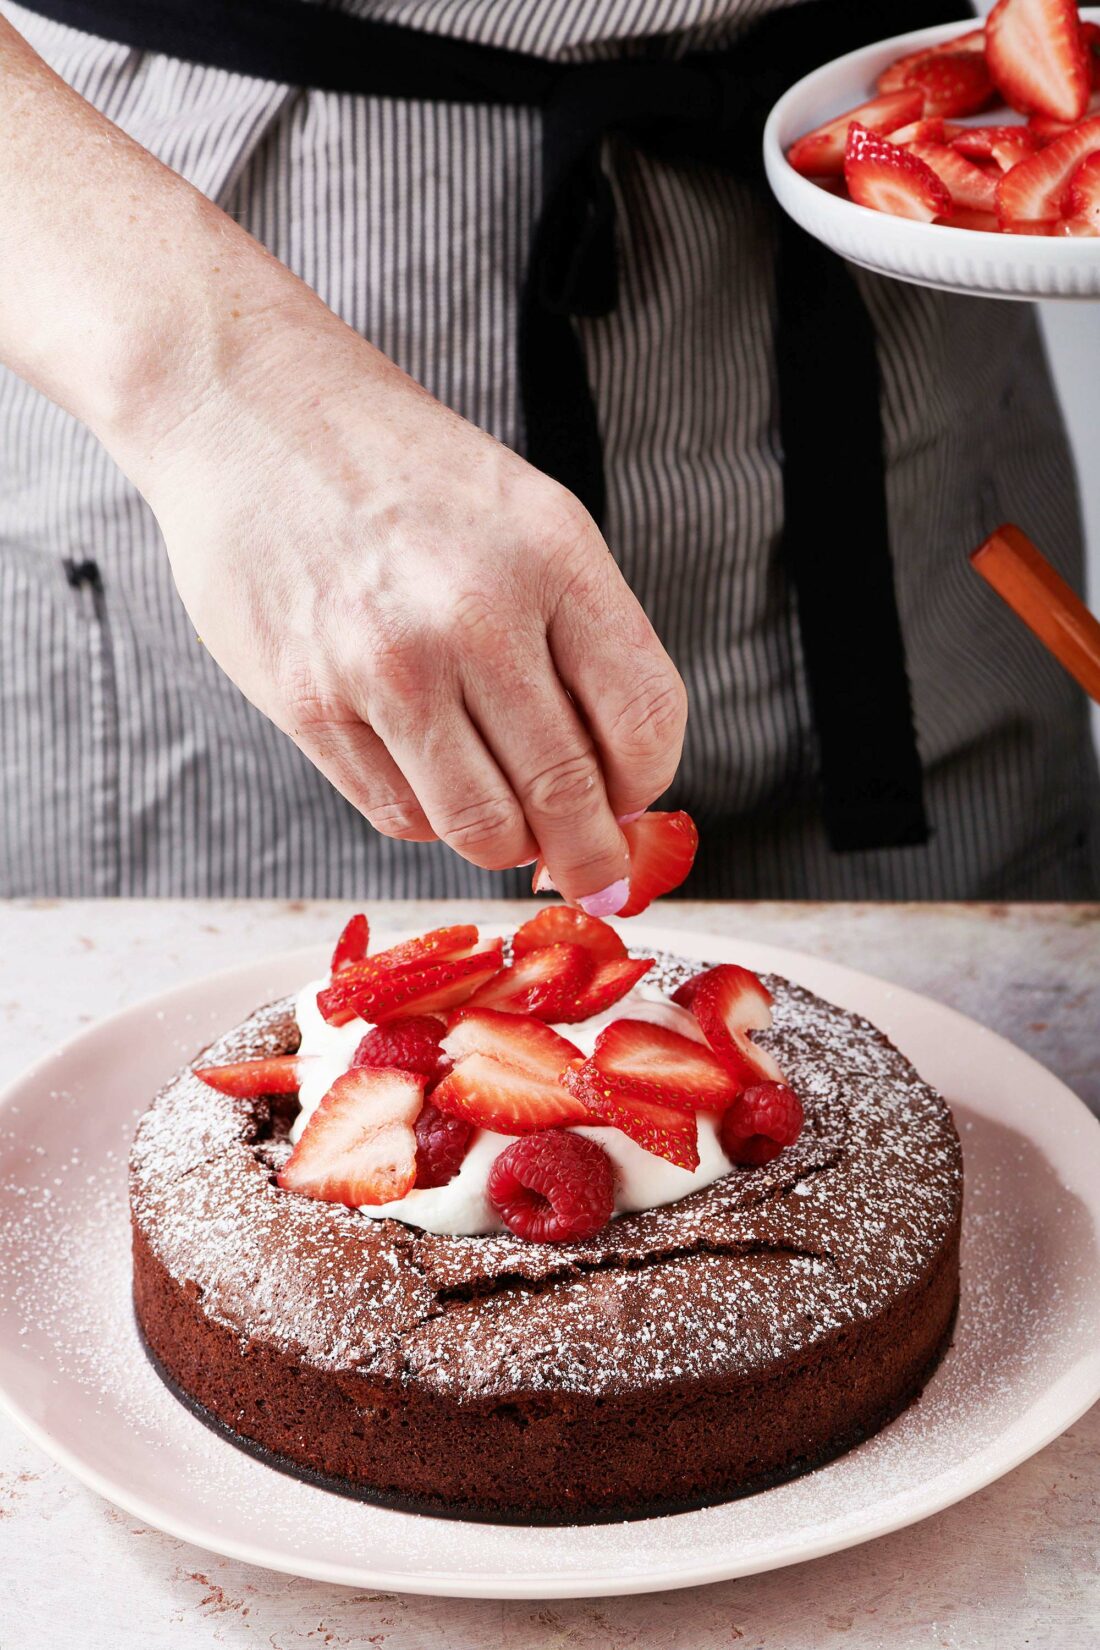 Woman adding sliced strawberries to the top of a Fudgy Chocolate Cake.